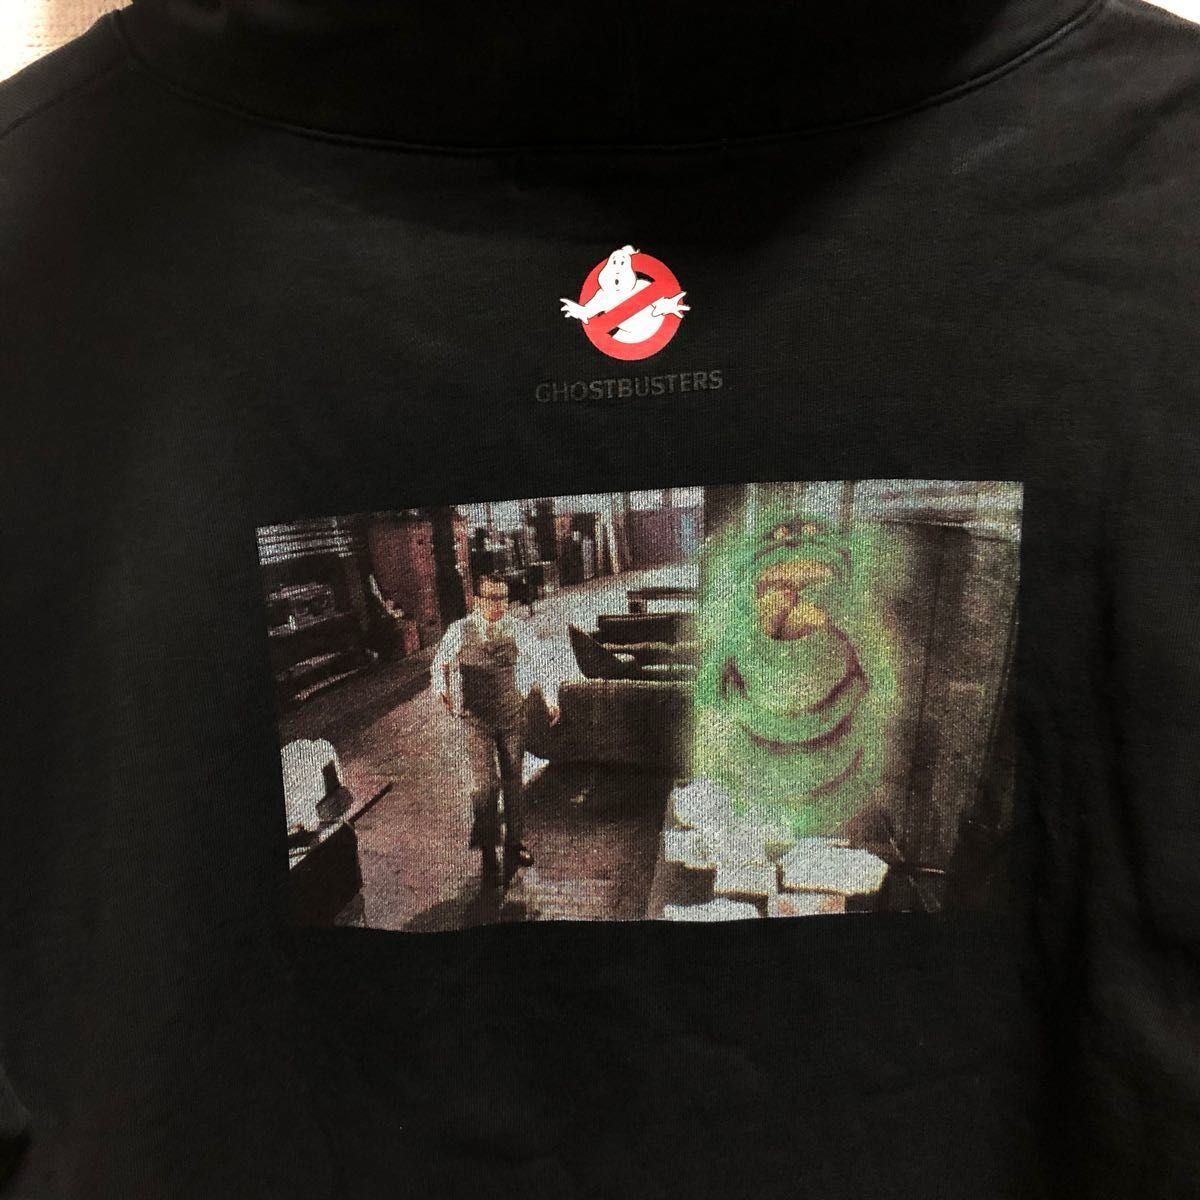 GHOST BUSTERS by SLY Pullover Hoodie